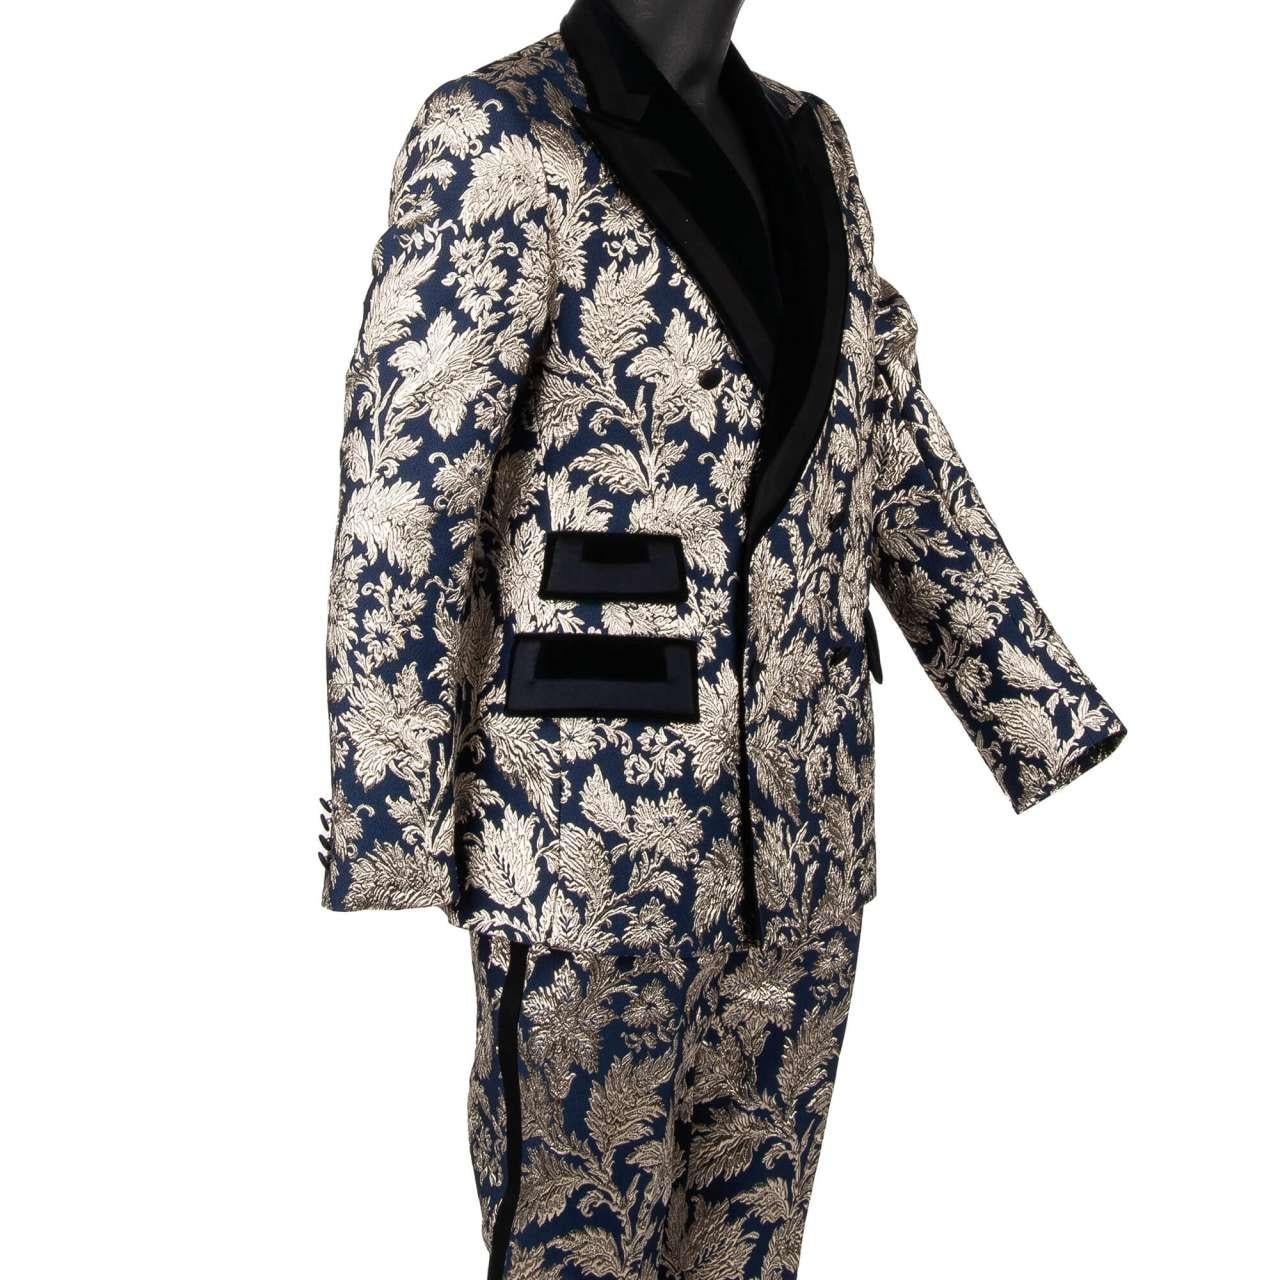 - Flowers pattern jacquard double-breasted suit with peak lapel in blue and silver by DOLCE & GABBANA - RUNWAY - Dolce & Gabbana Fashion Show - New with tag - Former RRP: EUR 3.450 - MADE IN ITALY - Slim Fit - Model: GK7IMT-HJMHB-S8354 - Material: